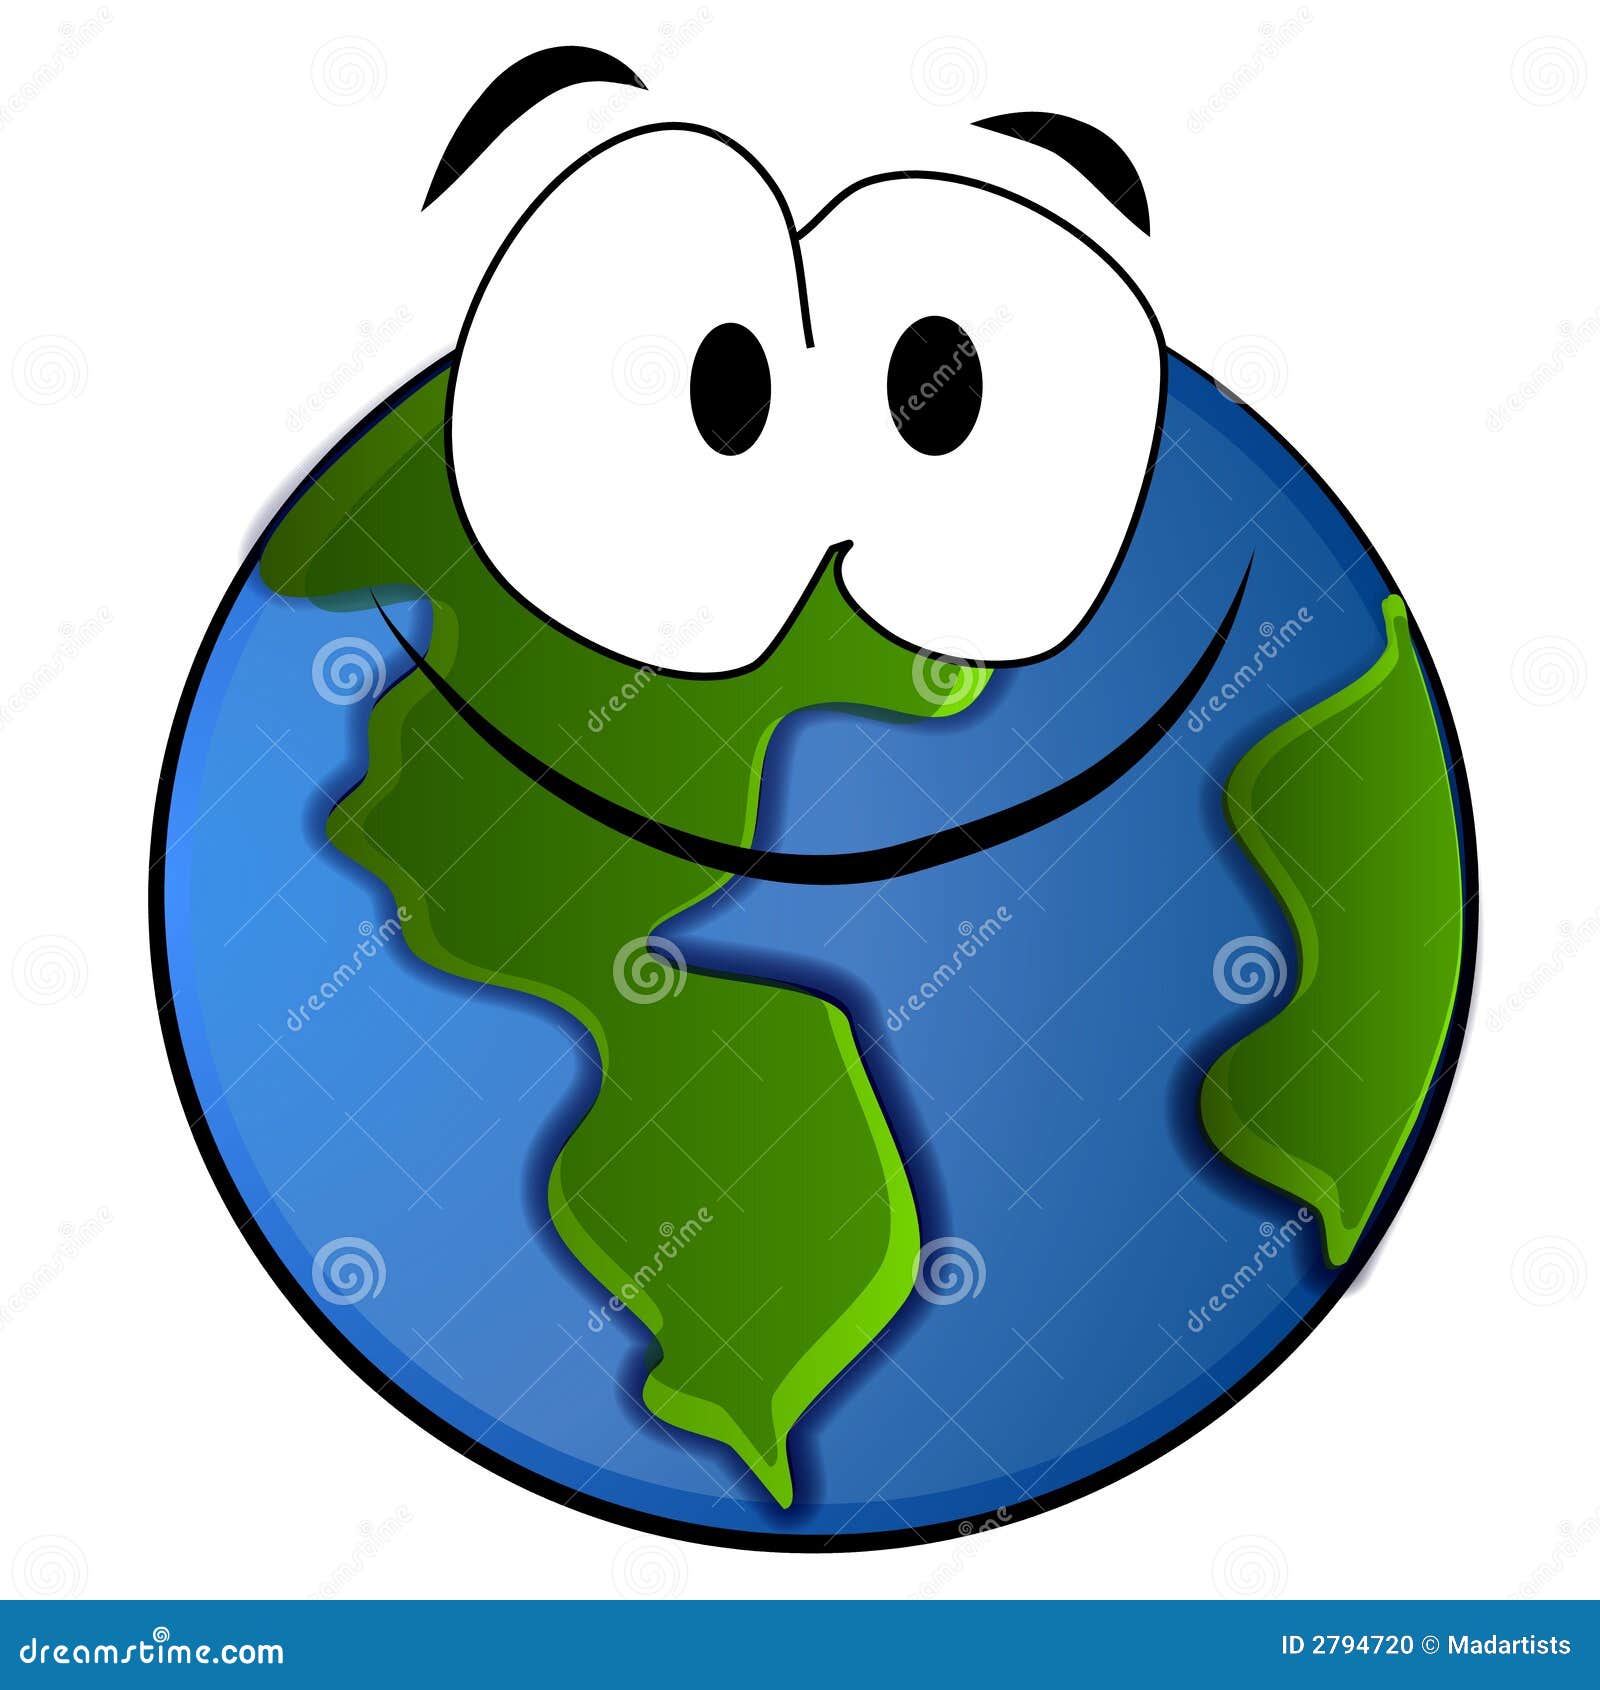 animated clipart of earth - photo #35